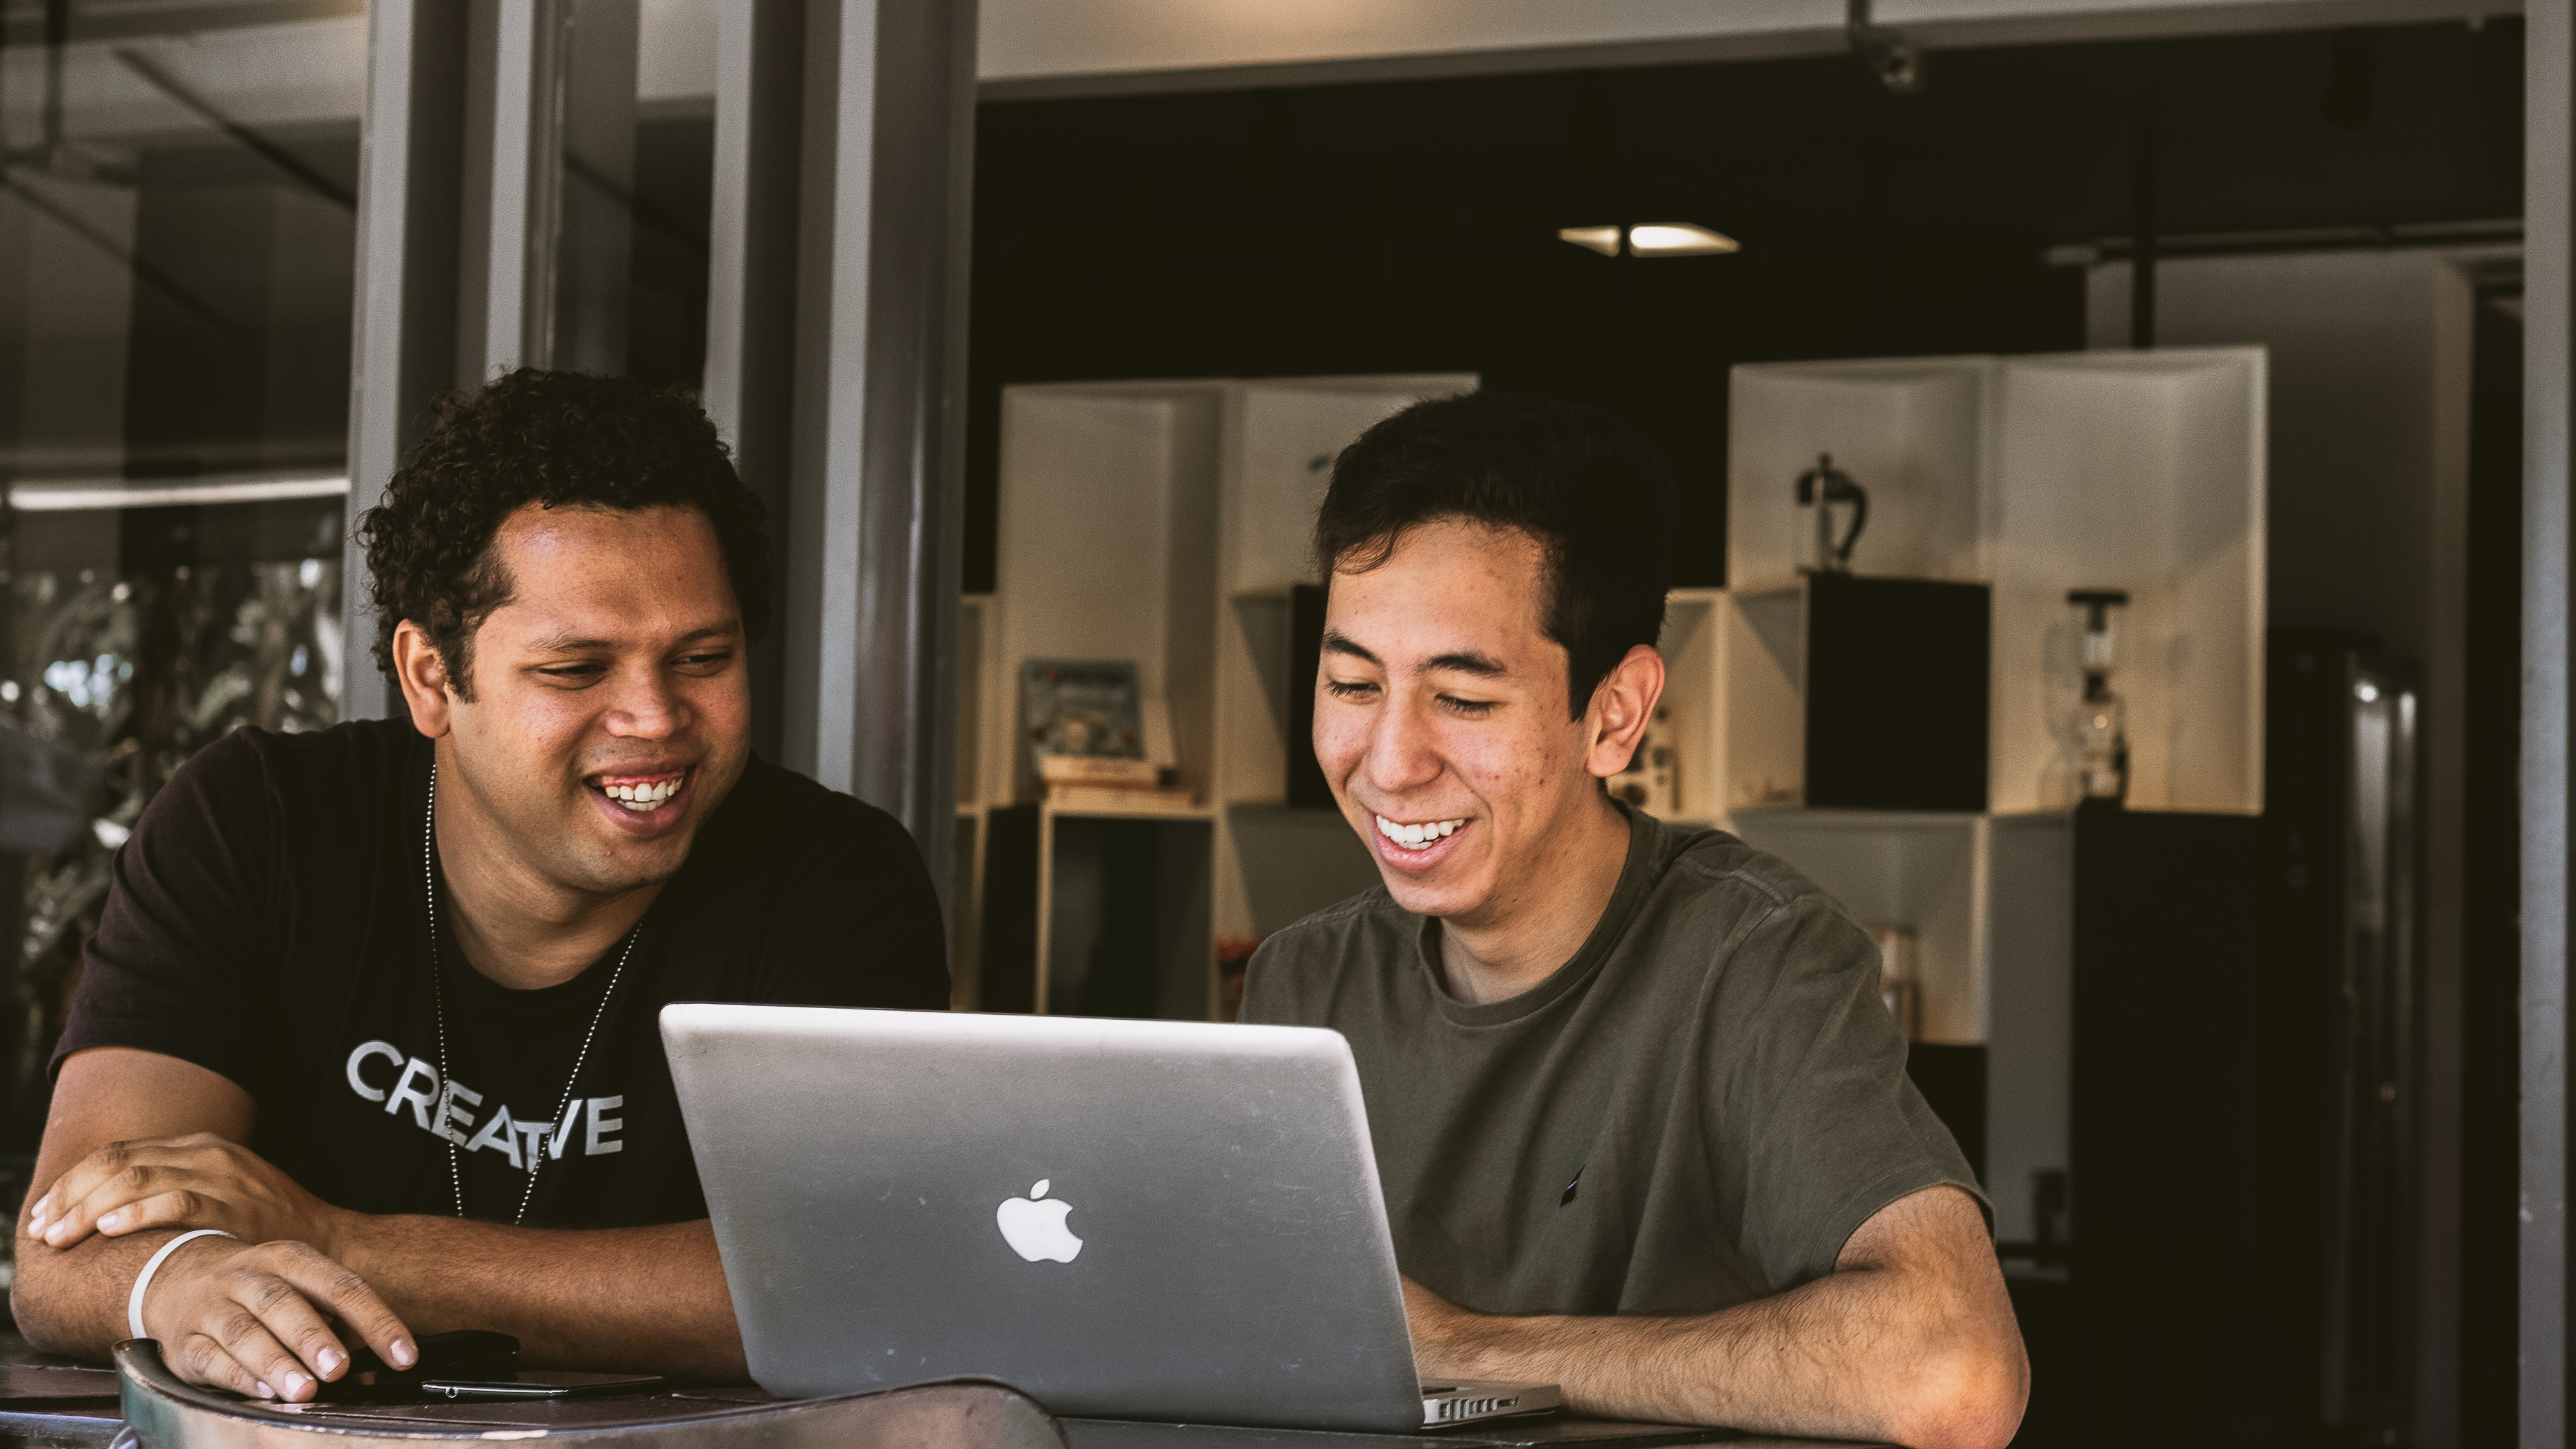 Two young adults smiling and looking at computer together